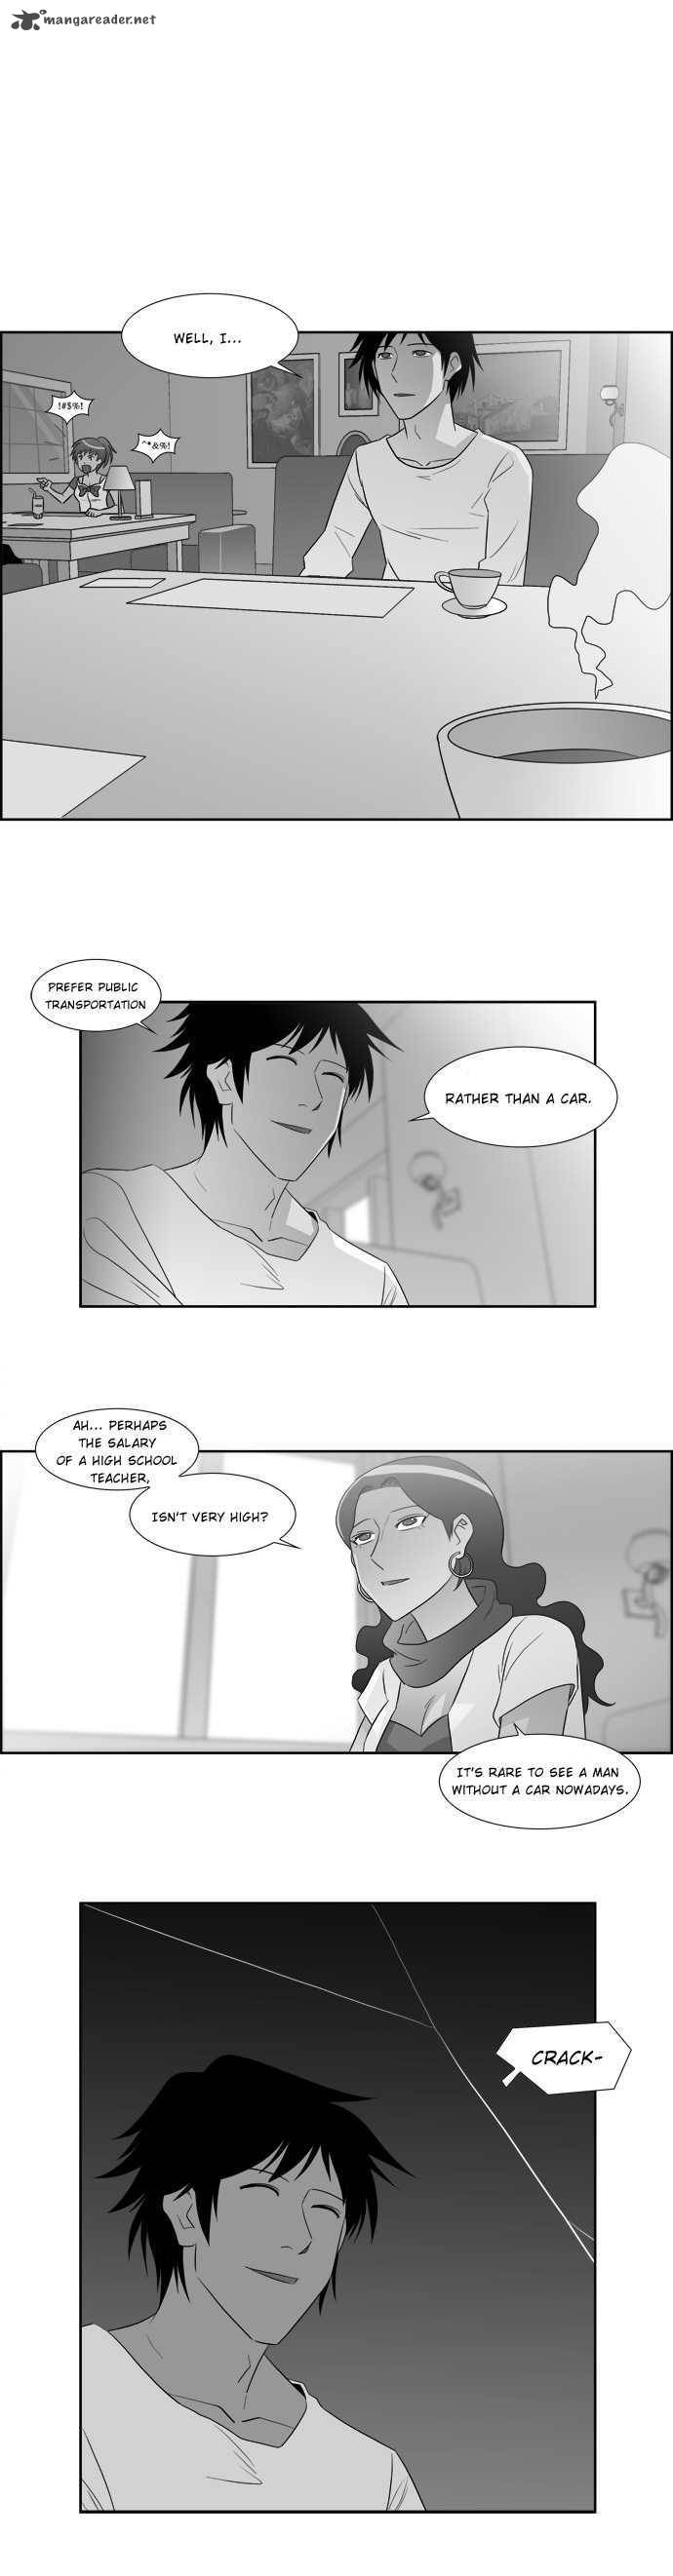 Melo Holic Chapter 5 Page 2